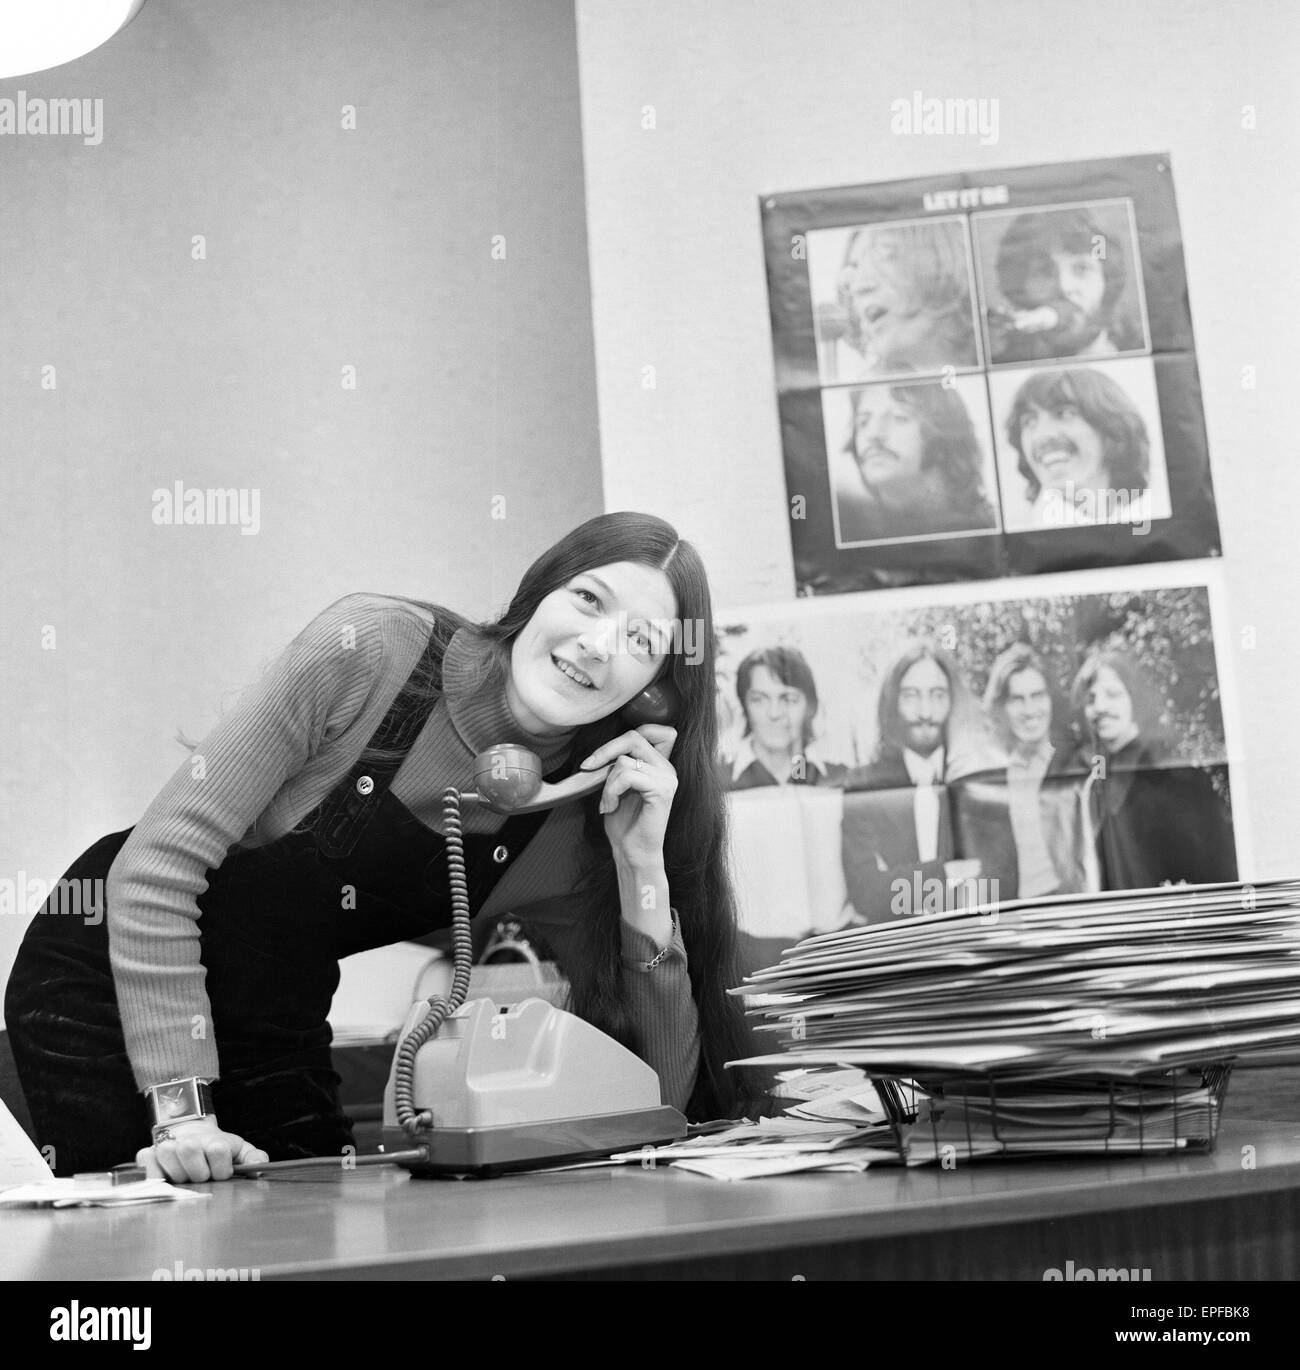 http://c8.alamy.com/comp/EPFBK8/freda-kelly-26-the-beatles-official-fan-club-secretary-pictured-at-EPFBK8.jpg